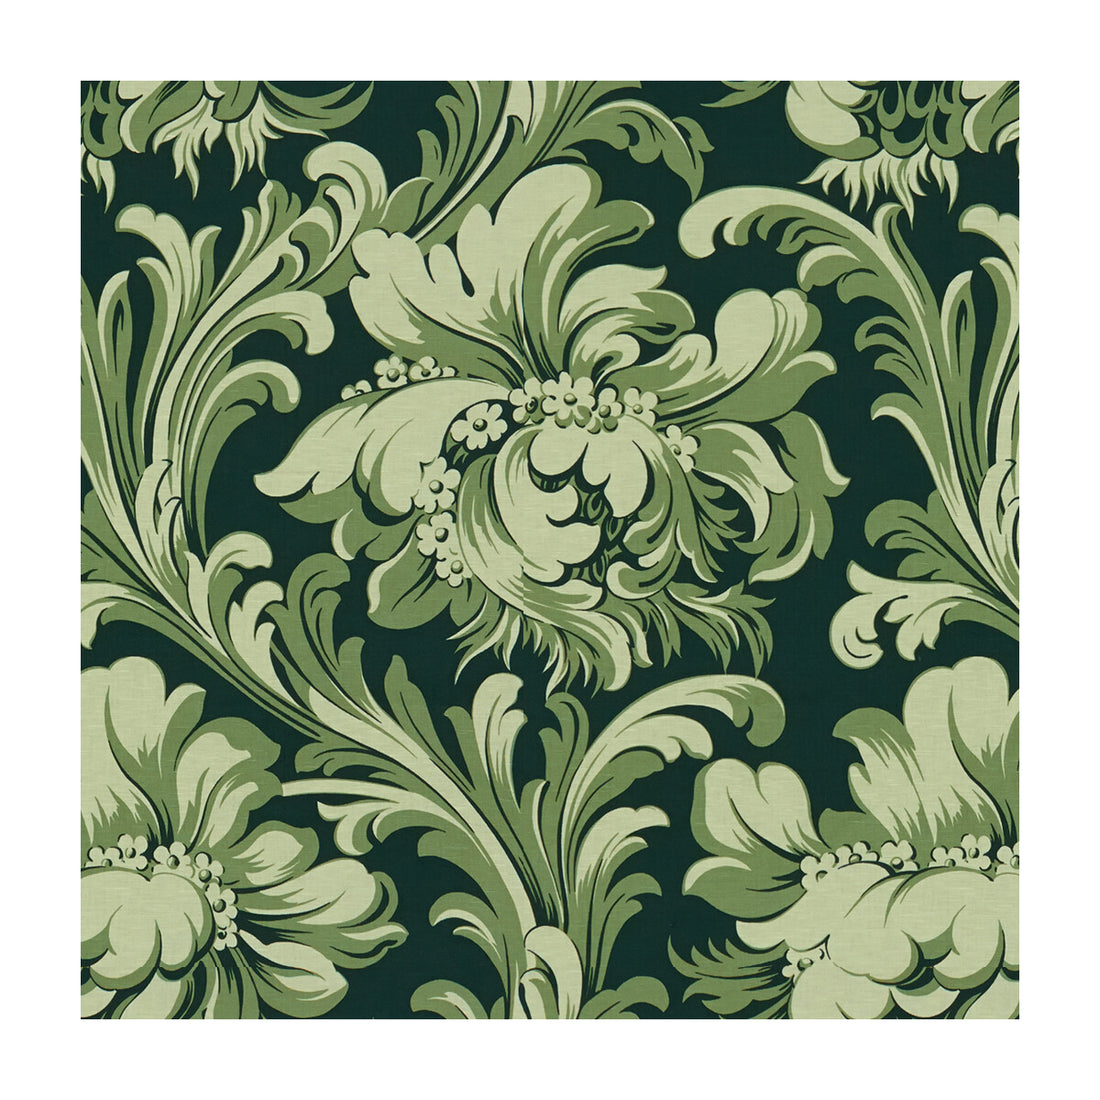 Mac Mahon fabric in vert color - pattern 8015142.3.0 - by Brunschwig &amp; Fils in the Madeleine Castaing collection